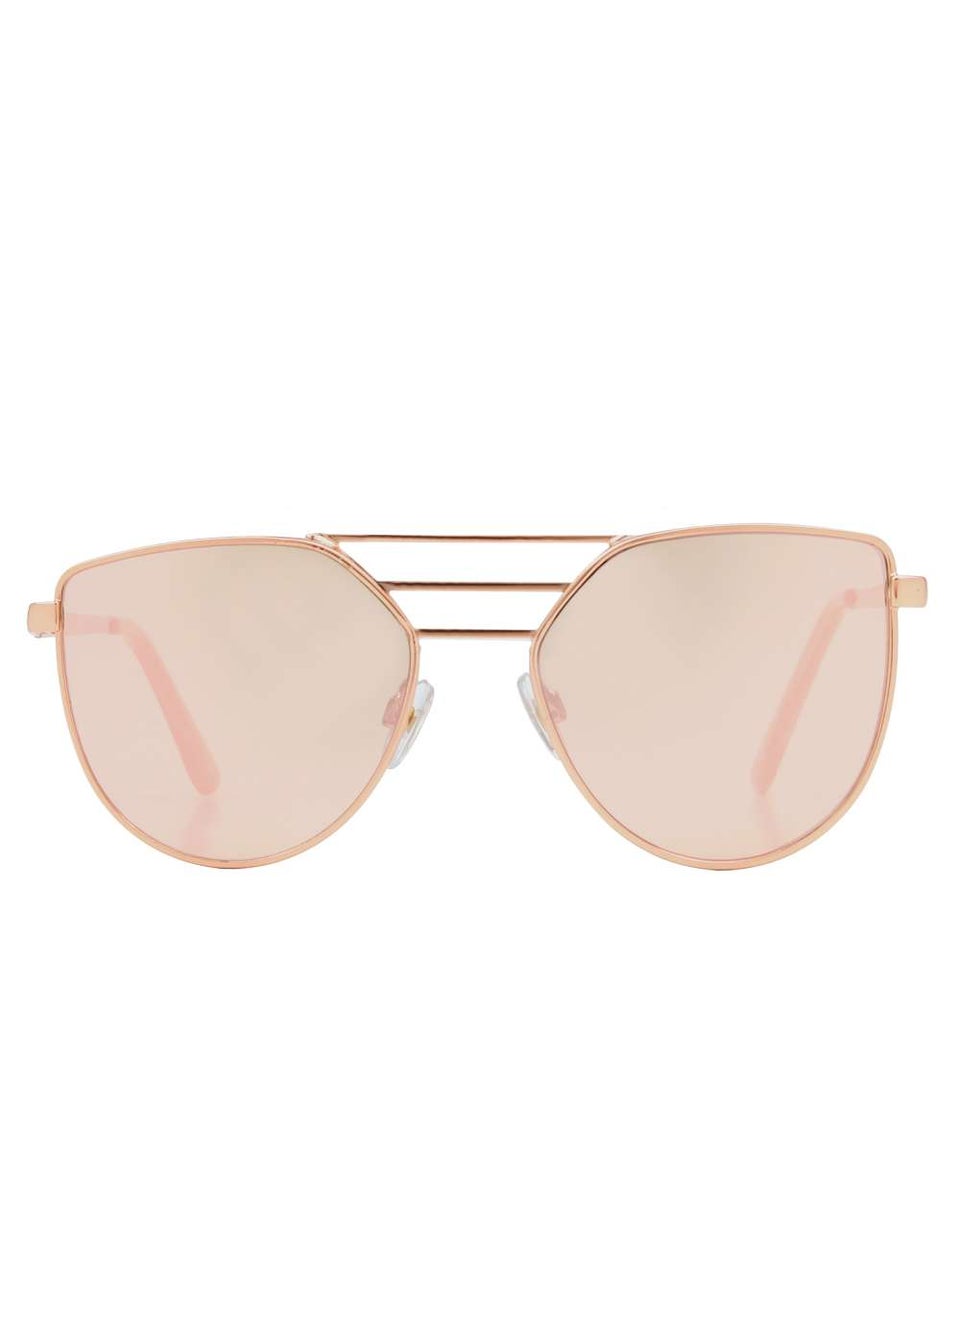 Foster Grant Rylie RSE Sunglasses